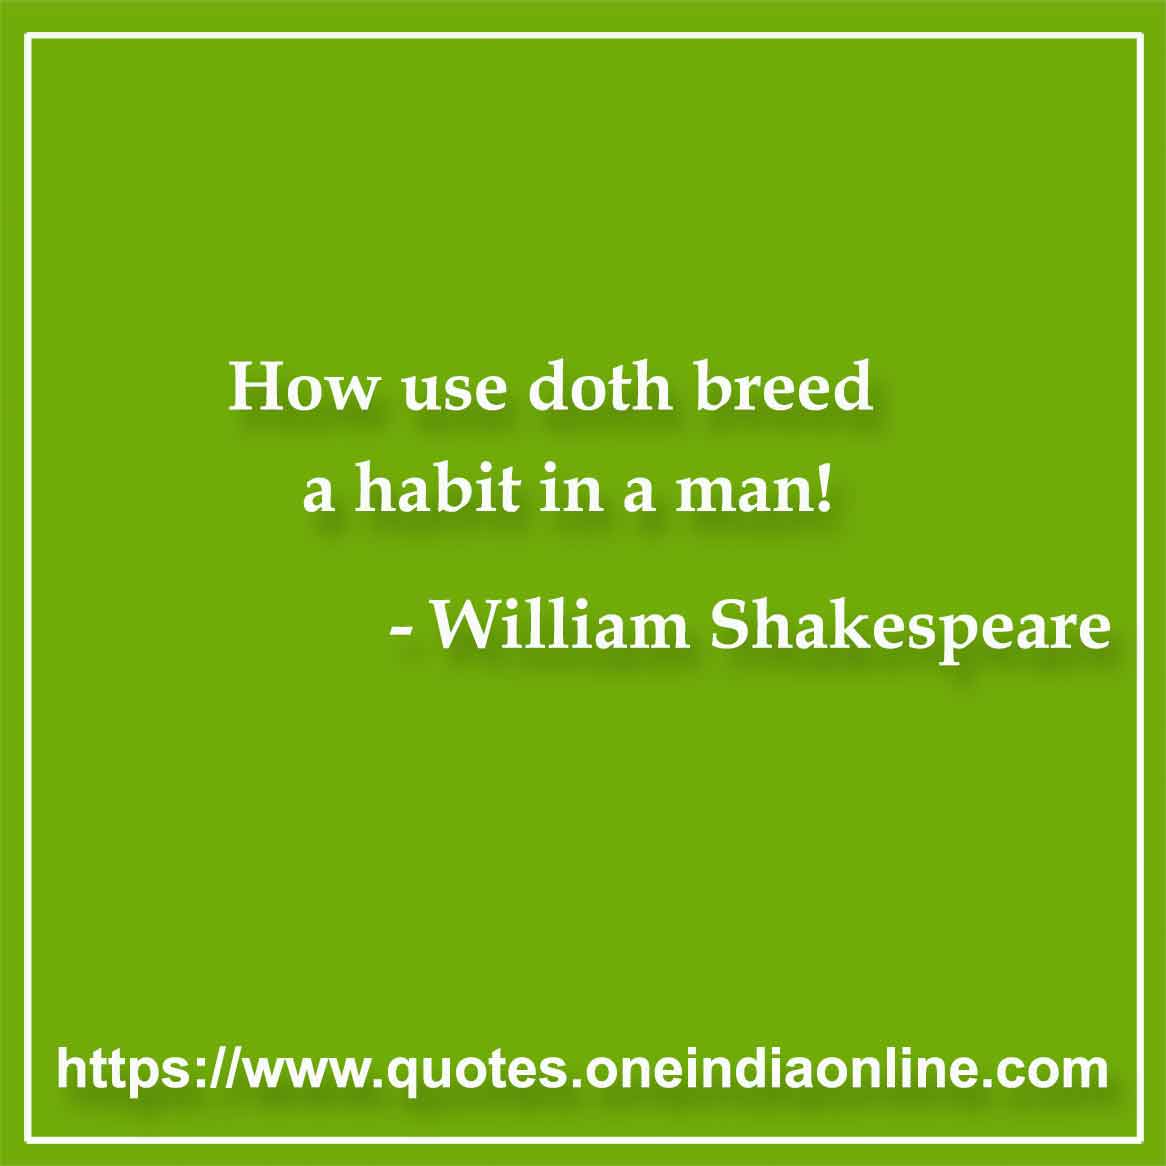 How use doth breed a habit in a man!

- Addiction Quote by William Shakespeare